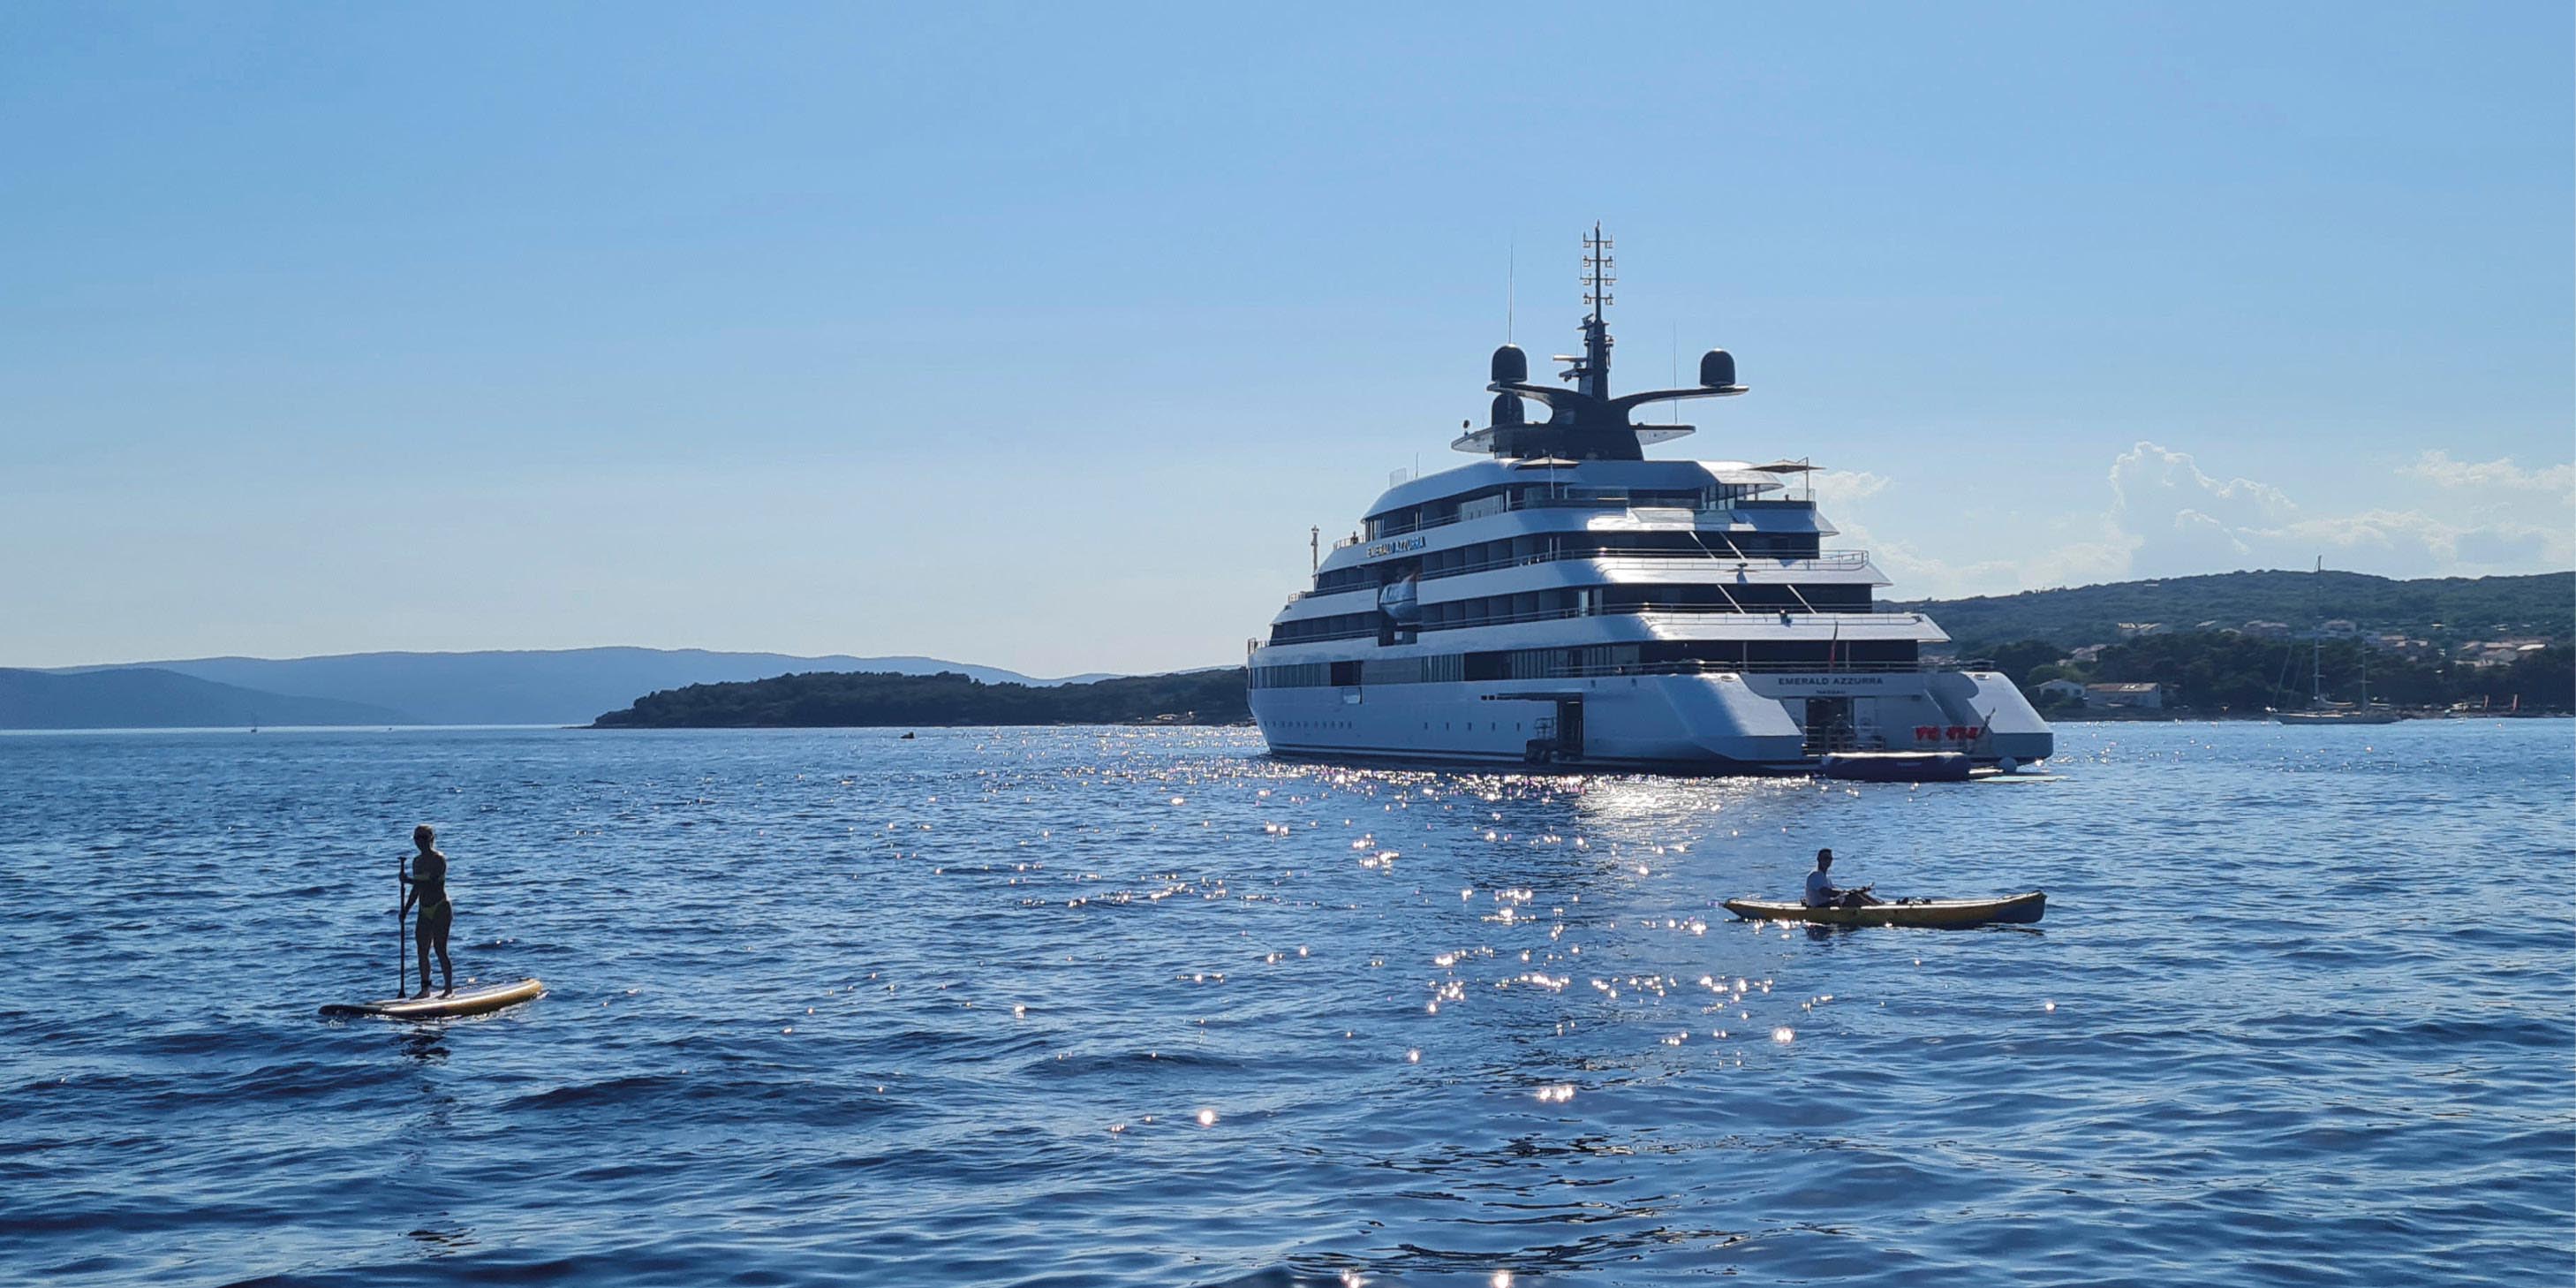 A paddleboarder and kayaker moving across the blue water near a luxury yacht on a sunny day